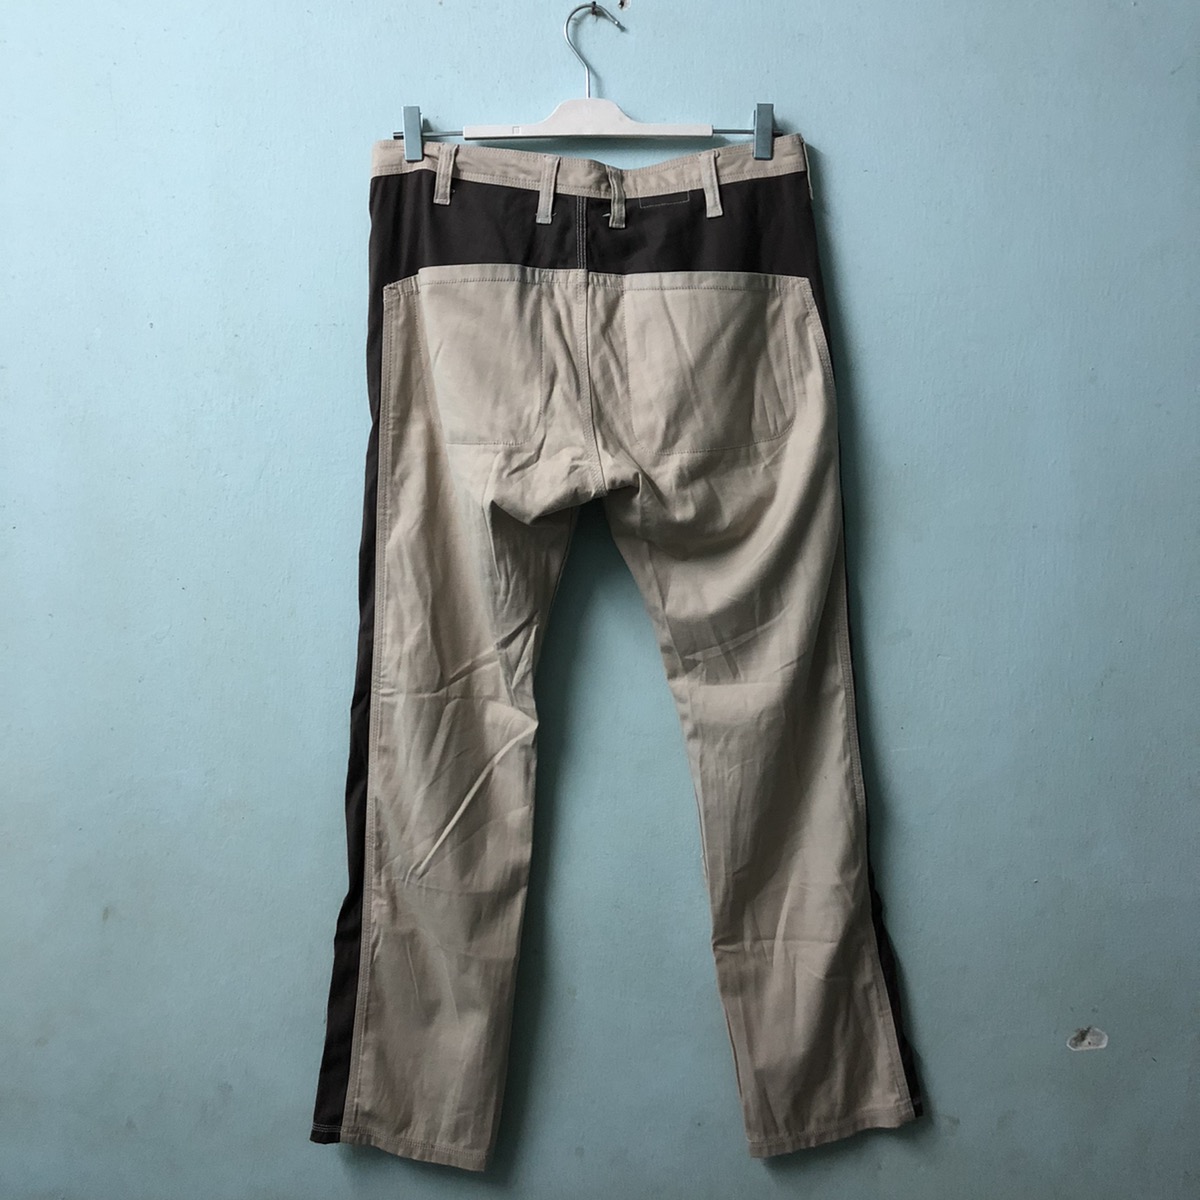 White Mountaineering side strape pants - 10